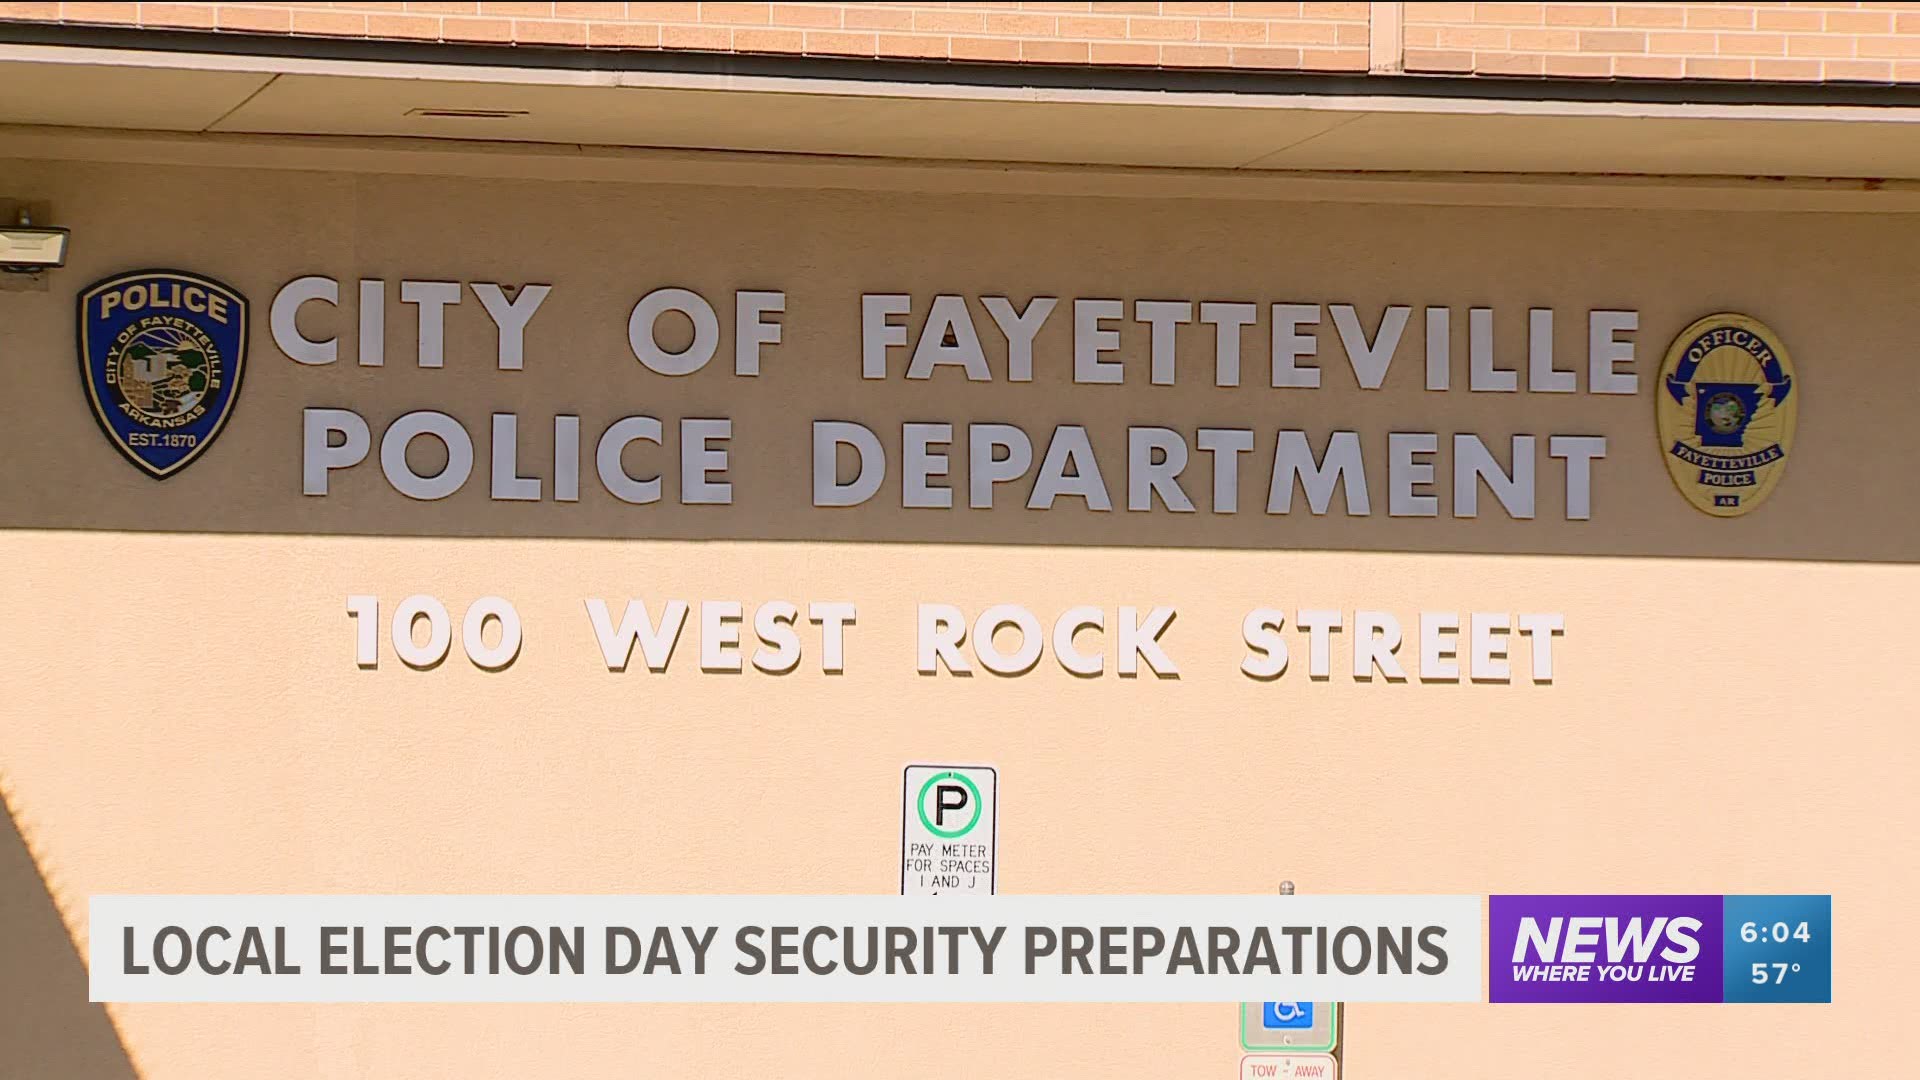 Police in Fort Smith and Fayetteville have contingency plans in case of an Election day emergency. https://bit.ly/2JsdQeV